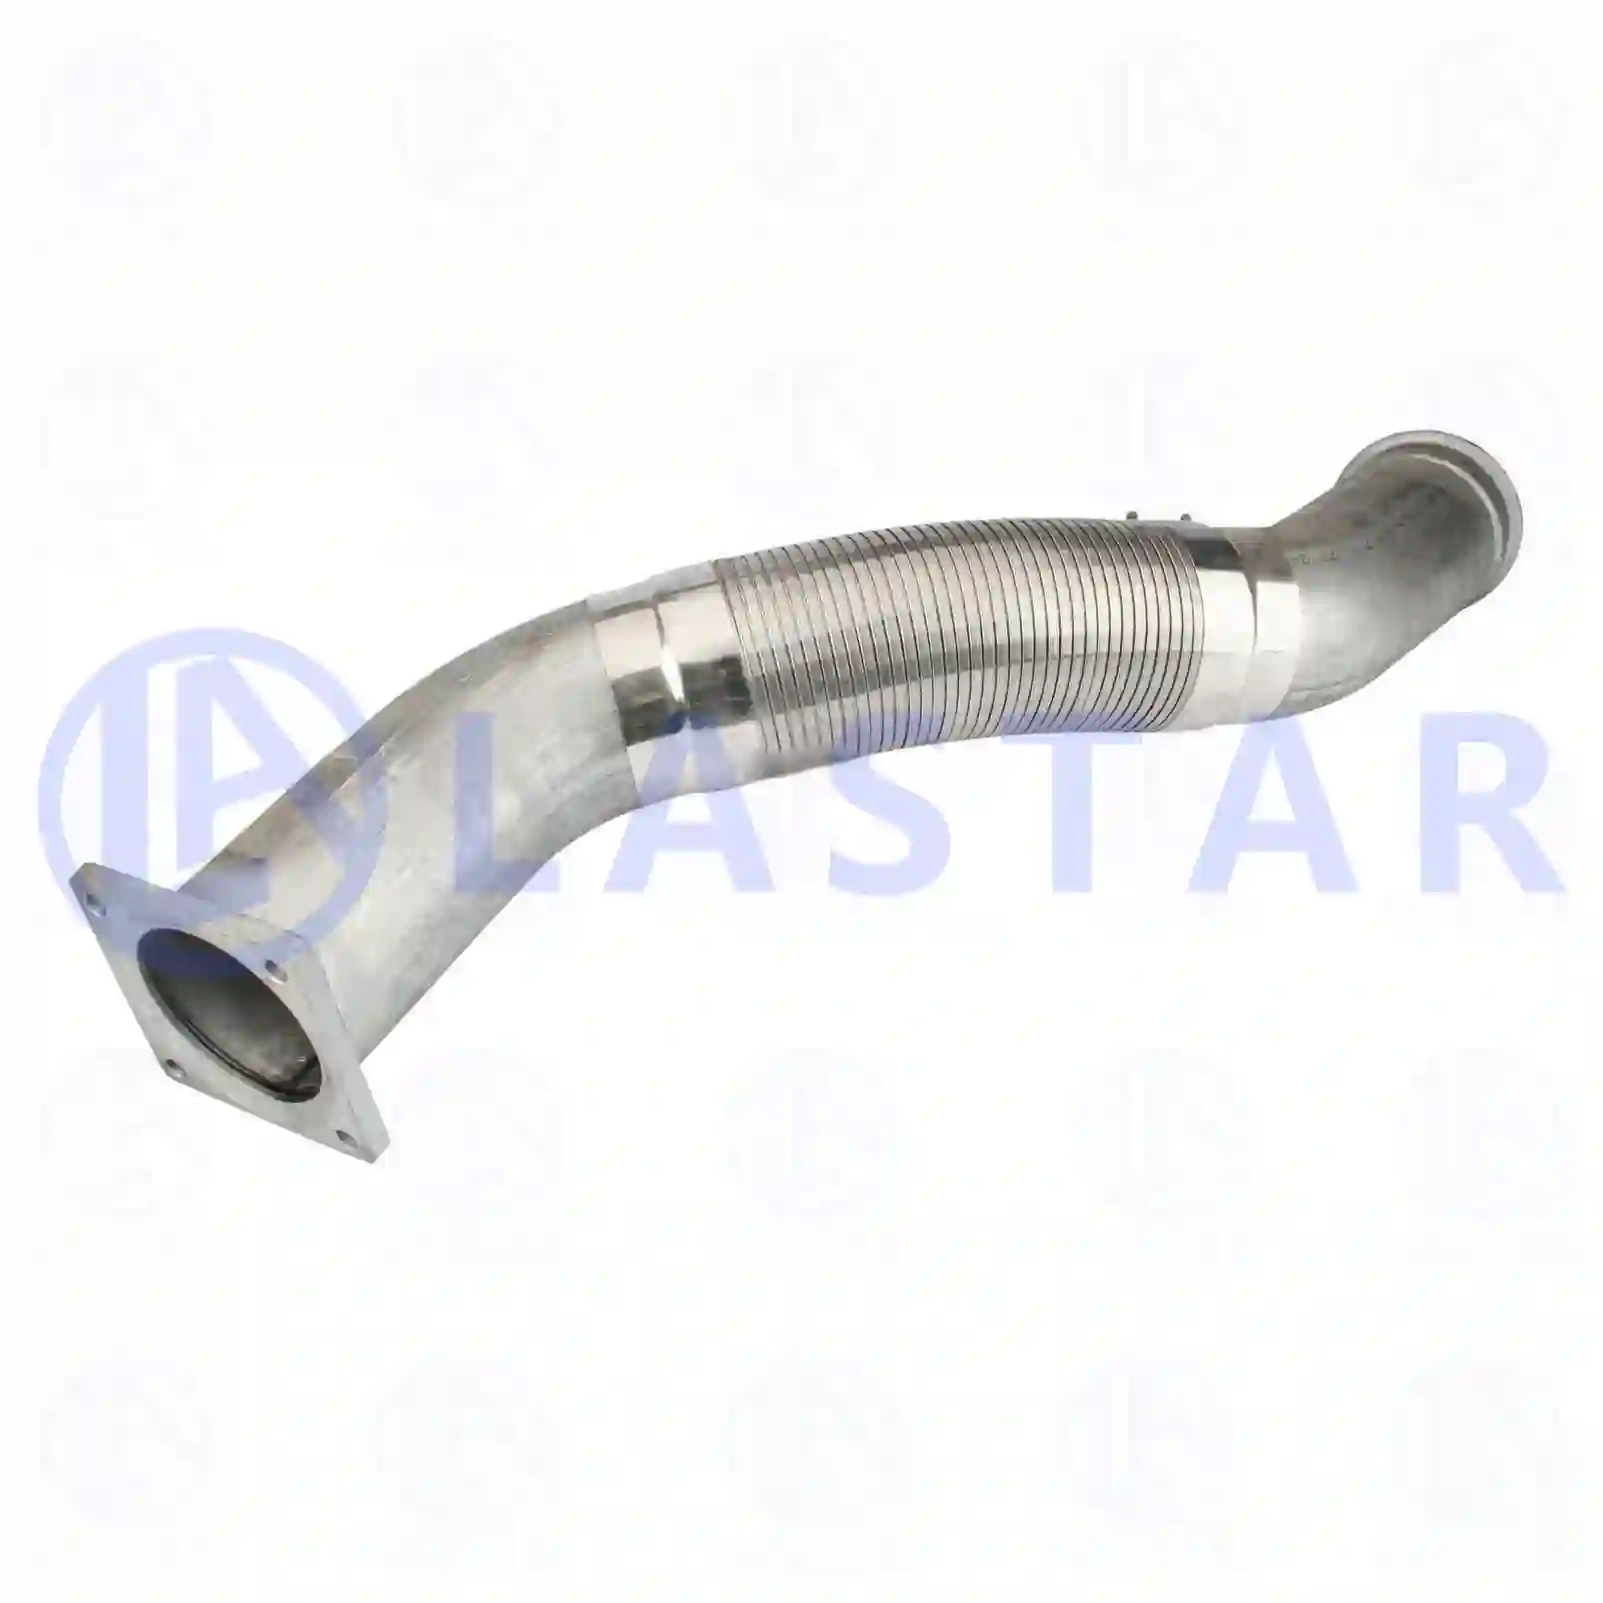 Front exhaust pipe, 77706476, 1293071, 1334251, 1428365 ||  77706476 Lastar Spare Part | Truck Spare Parts, Auotomotive Spare Parts Front exhaust pipe, 77706476, 1293071, 1334251, 1428365 ||  77706476 Lastar Spare Part | Truck Spare Parts, Auotomotive Spare Parts